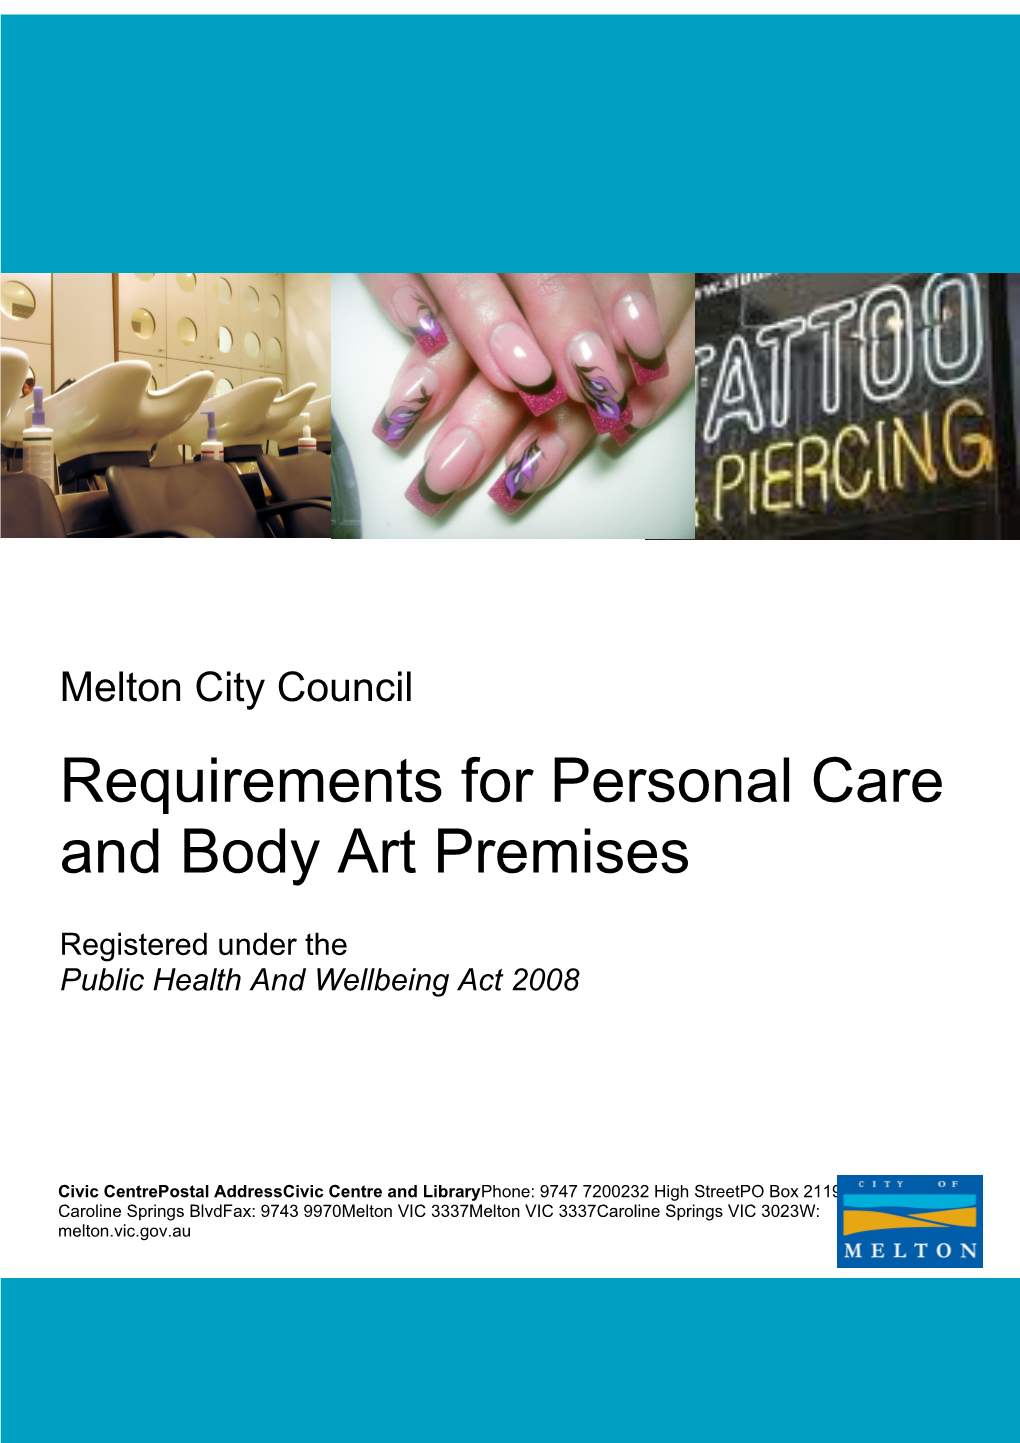 Registration Requirements for Personal Care and Body Art Industries